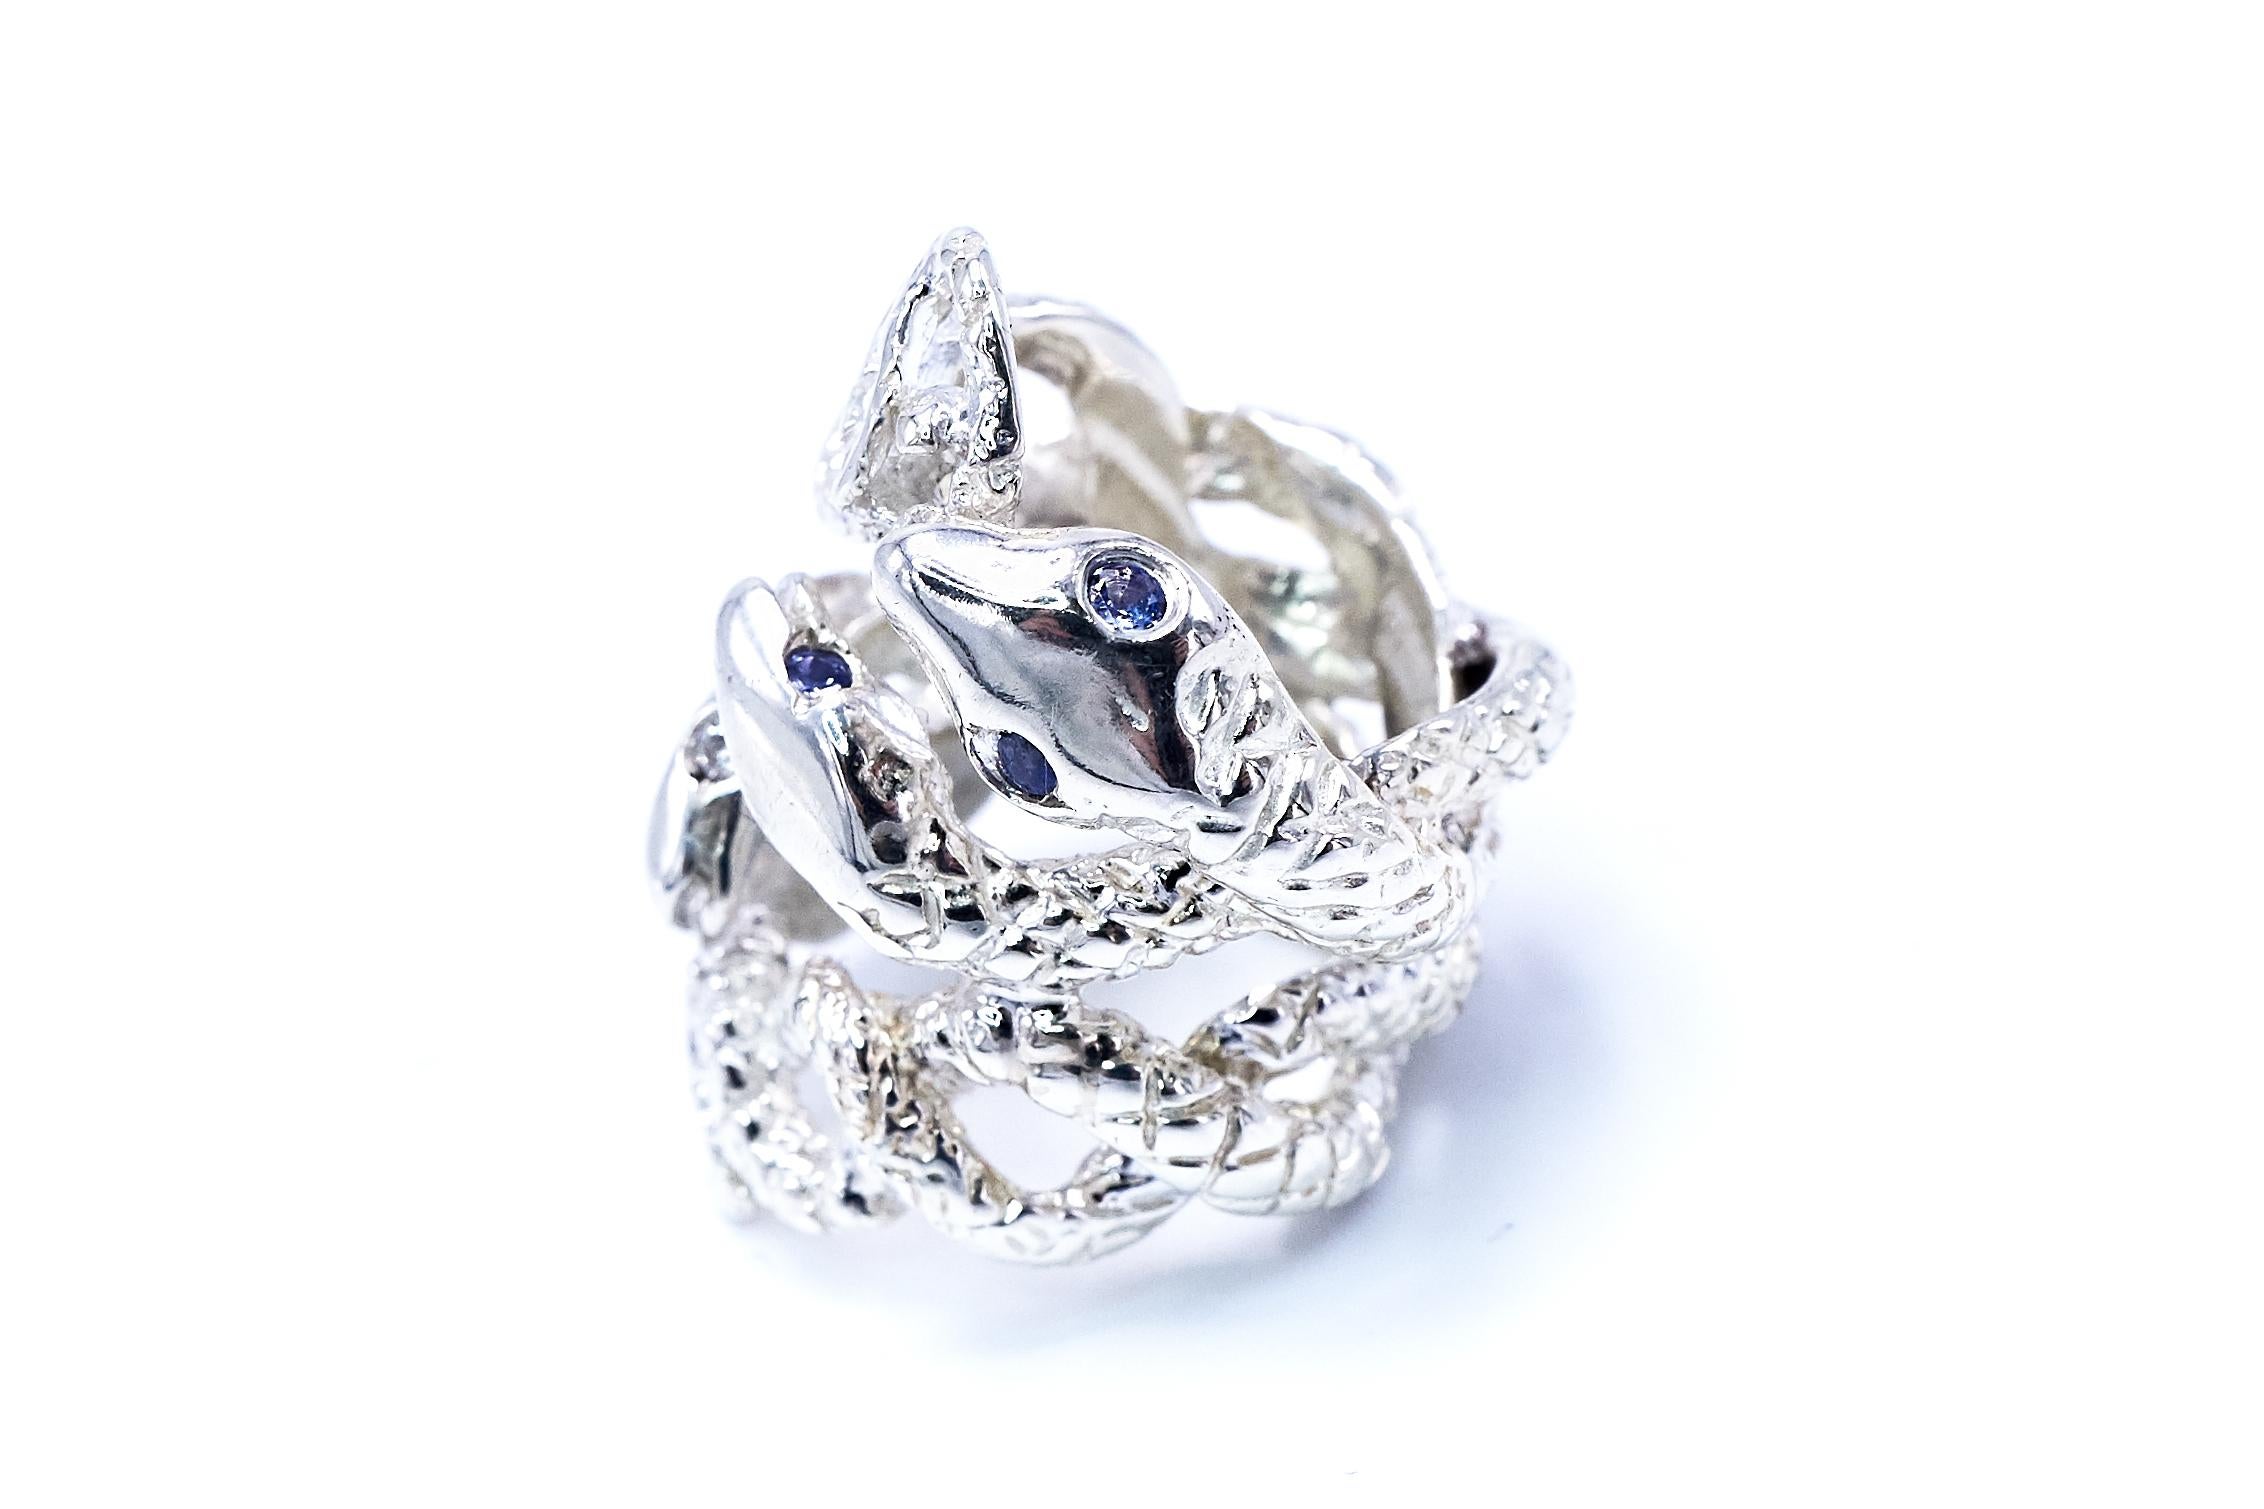 Snake Ring Statement Silver Cocktail Ring White Diamond Ruby Tanzanite J Dauphin For Sale 3